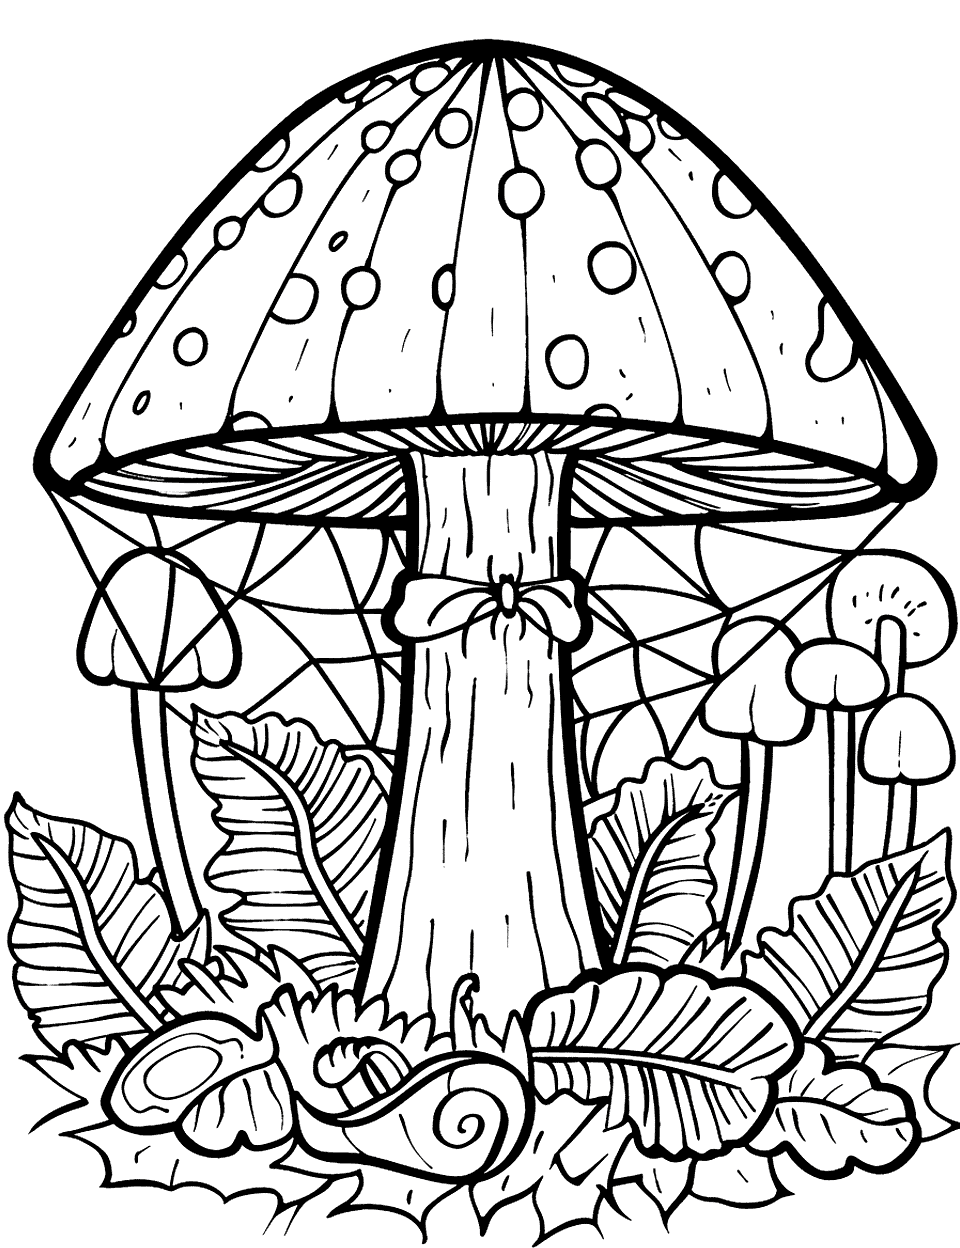 Mushroom and Spider Web Coloring Page - A spider web stretches between a mushroom and nearby foliage.